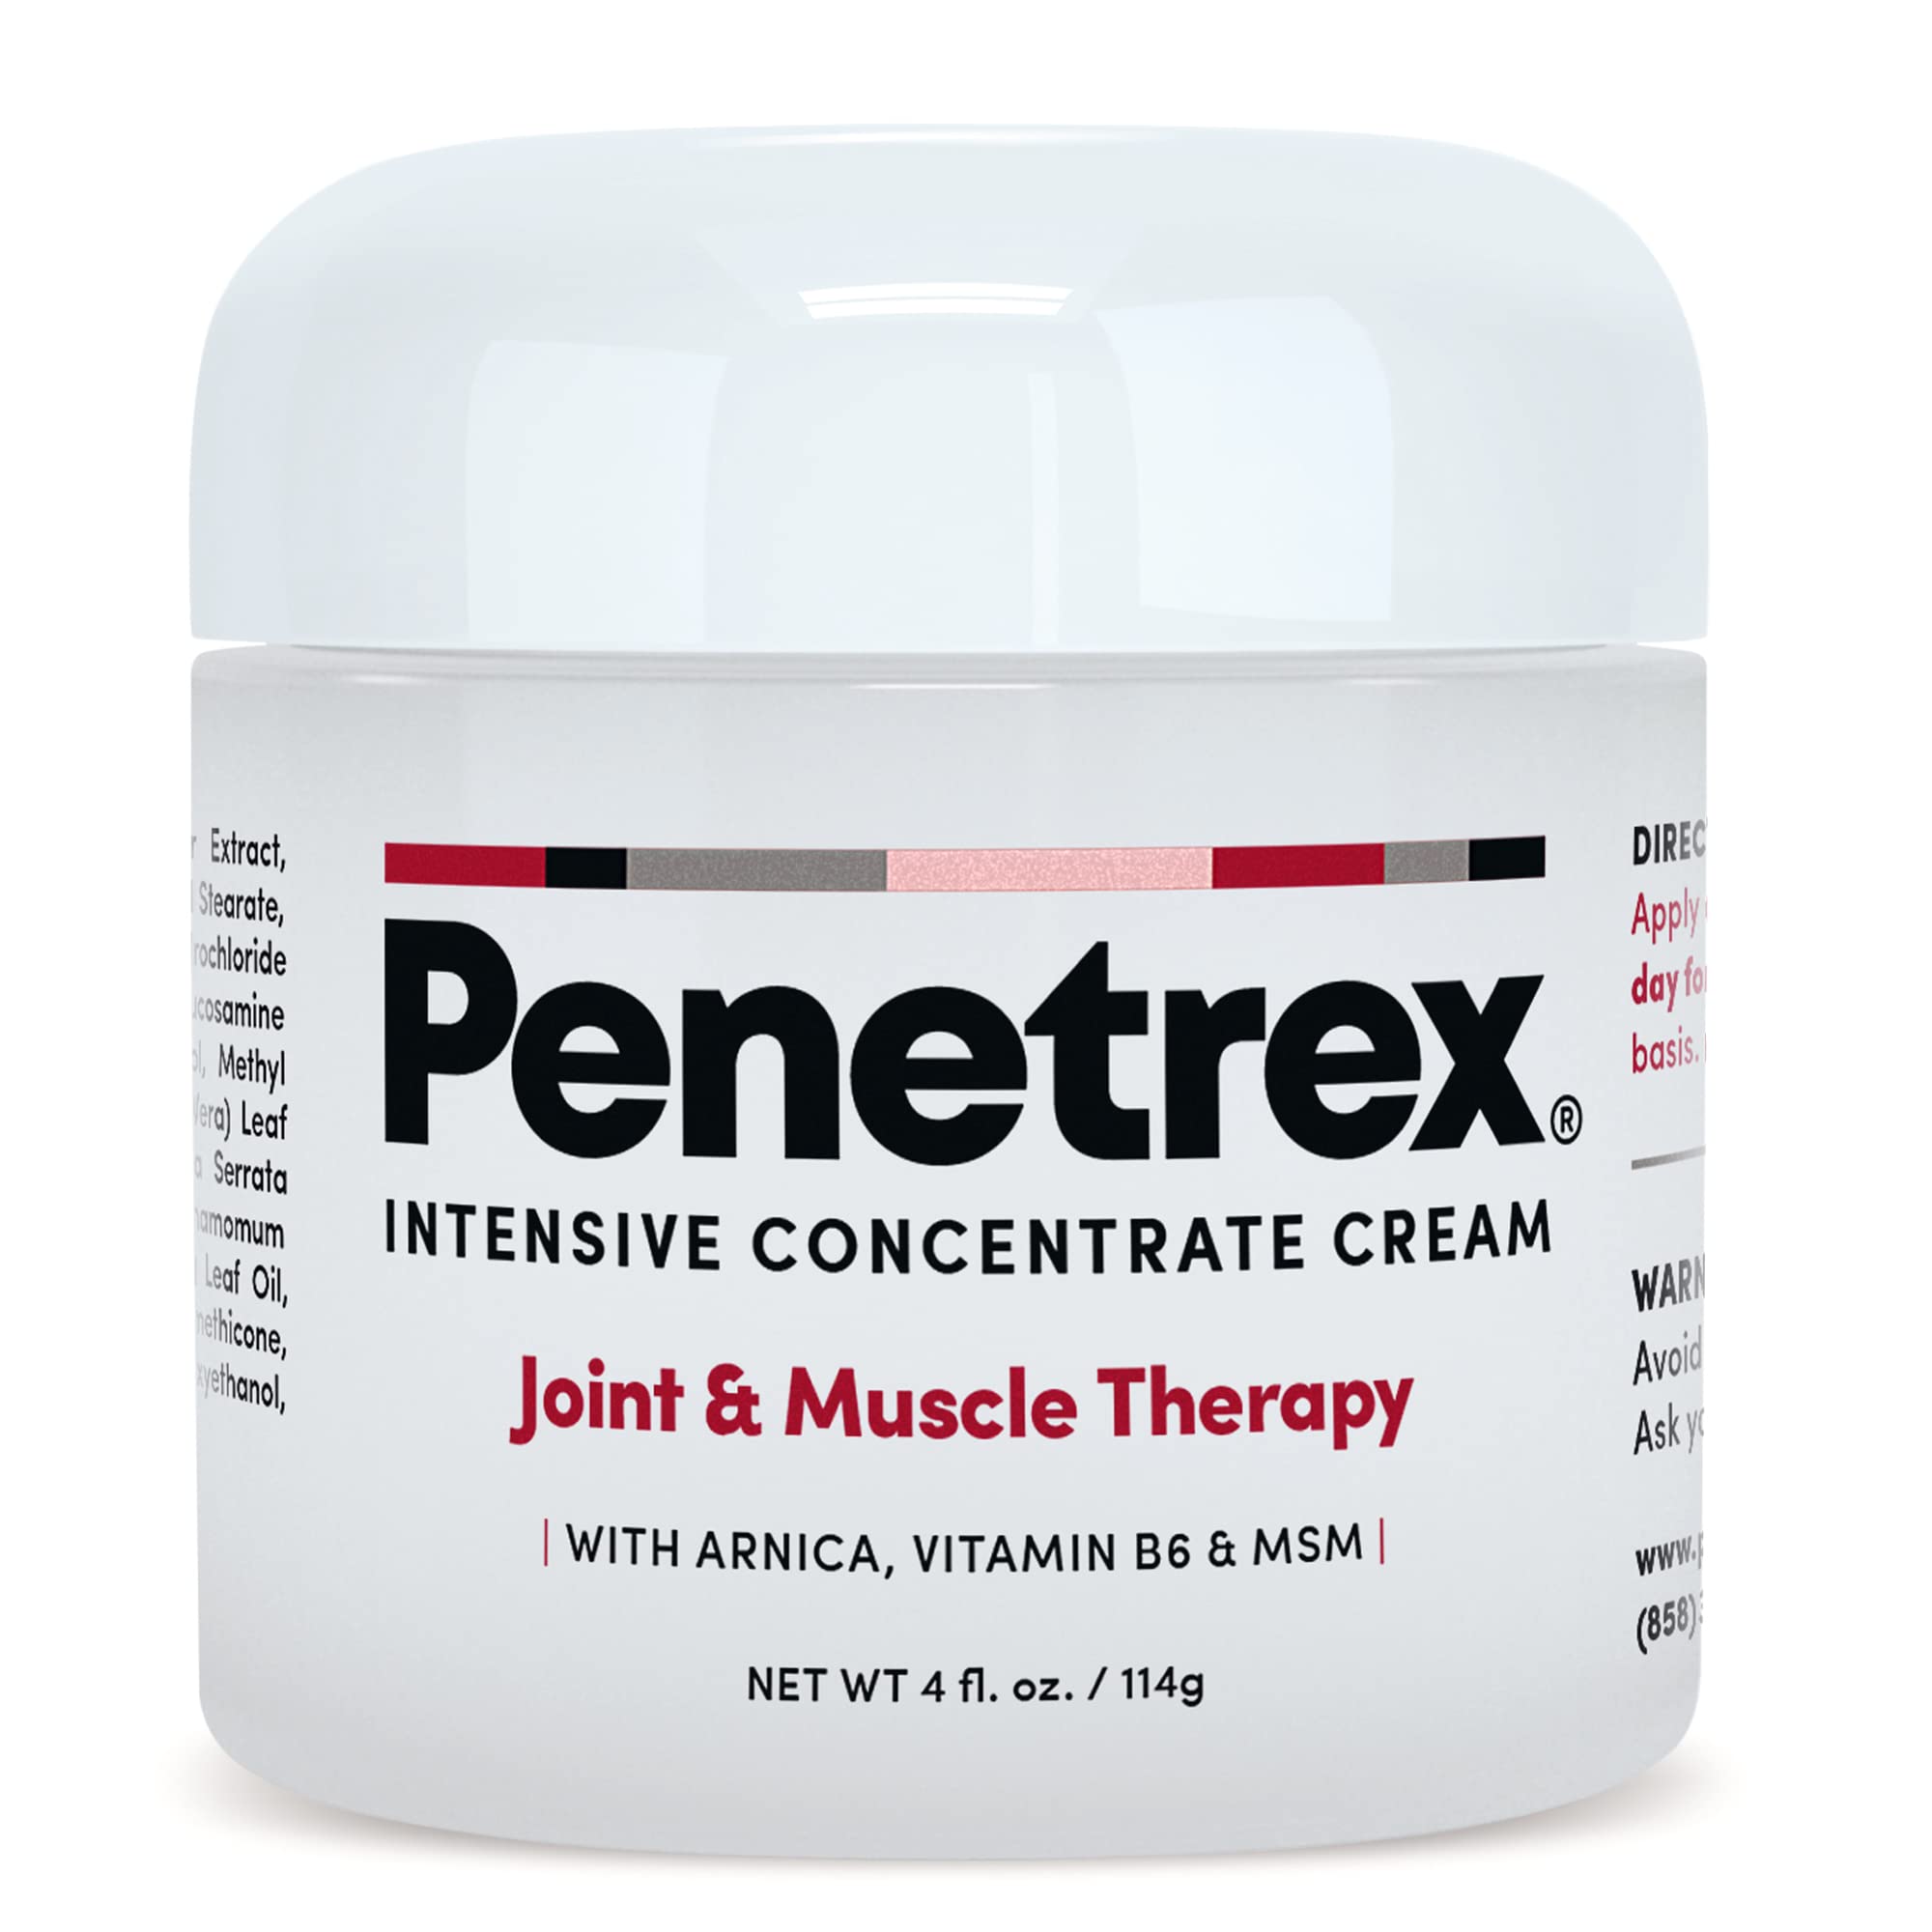 Penetrex Joint & Muscle Therapy – 4oz Cream – Intensive Concentrate Rub for Joint and Muscle Recovery, Premium Formula with Arnica, Vitamin B6 and MSM Provides Relief for Back, Neck, Hands, Feet